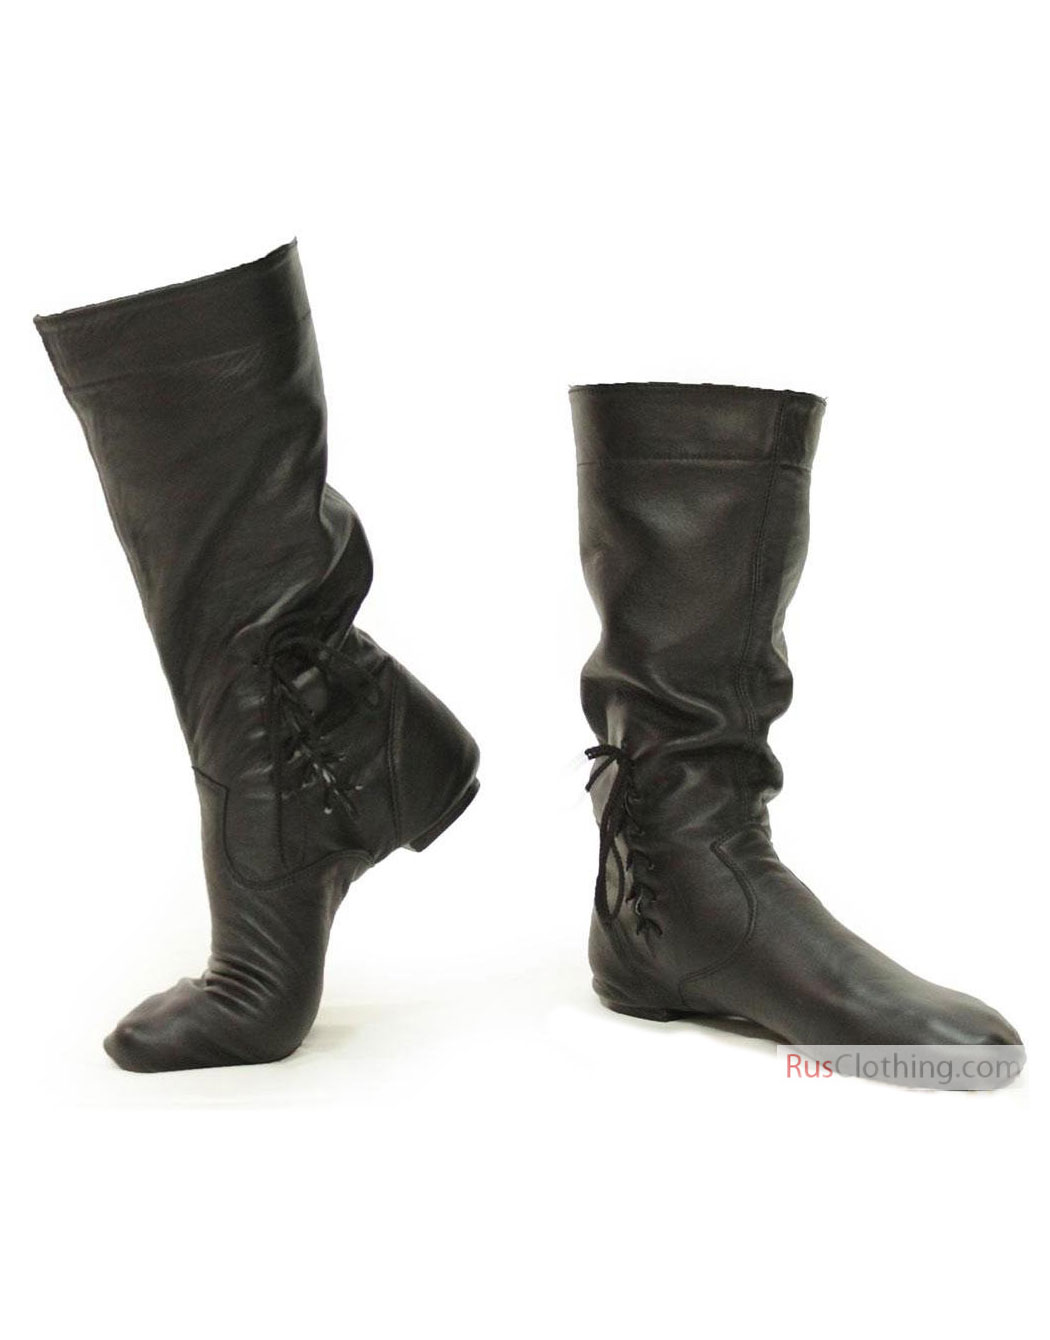 Indomitable Freeze Accepted Folk dance boots for men | RusClothing.com